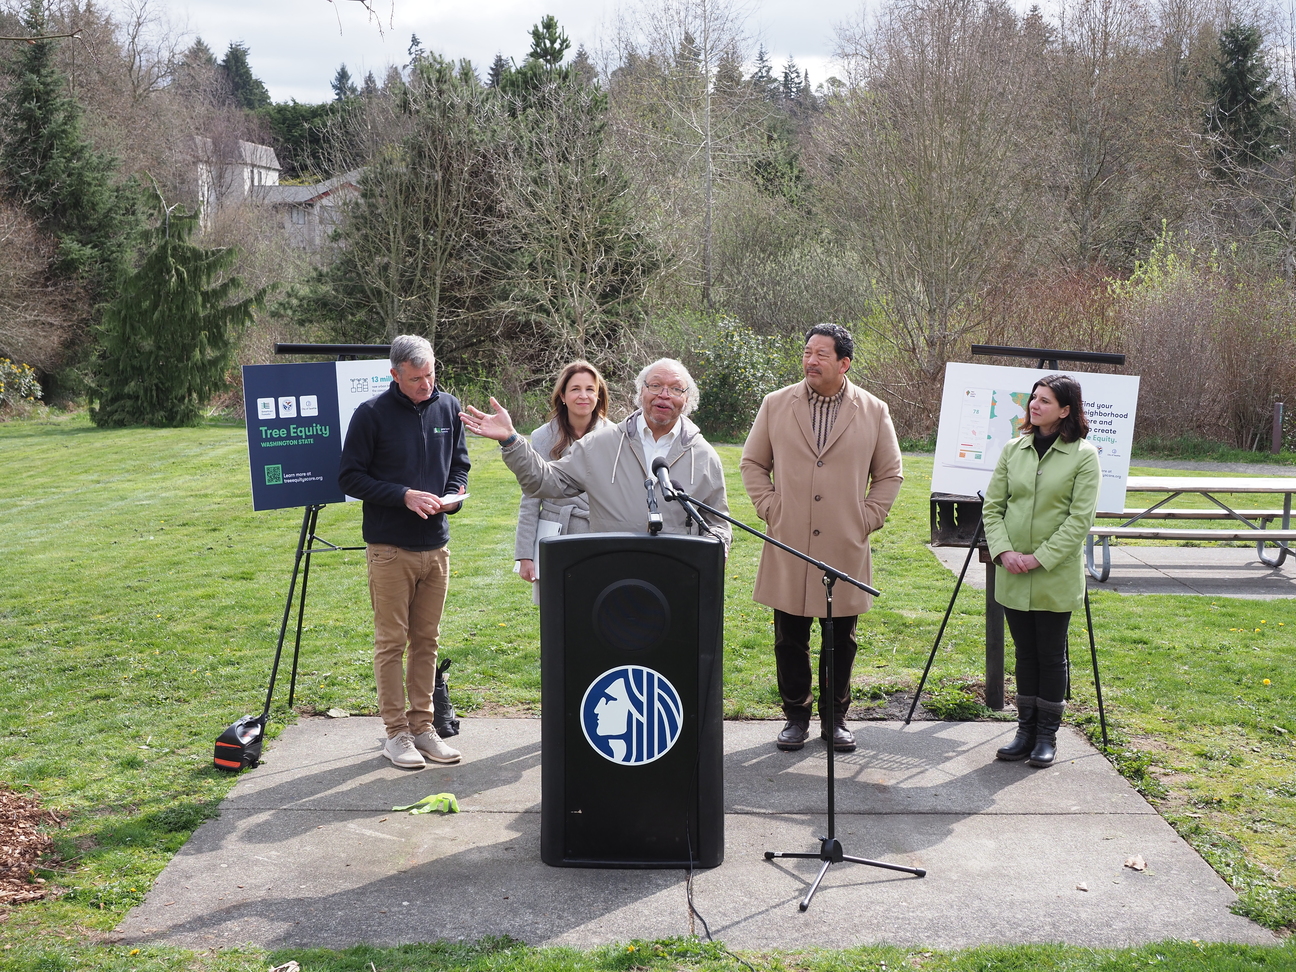 Speakers at a press conference announcing the first statewide tree equity collaborative in the country